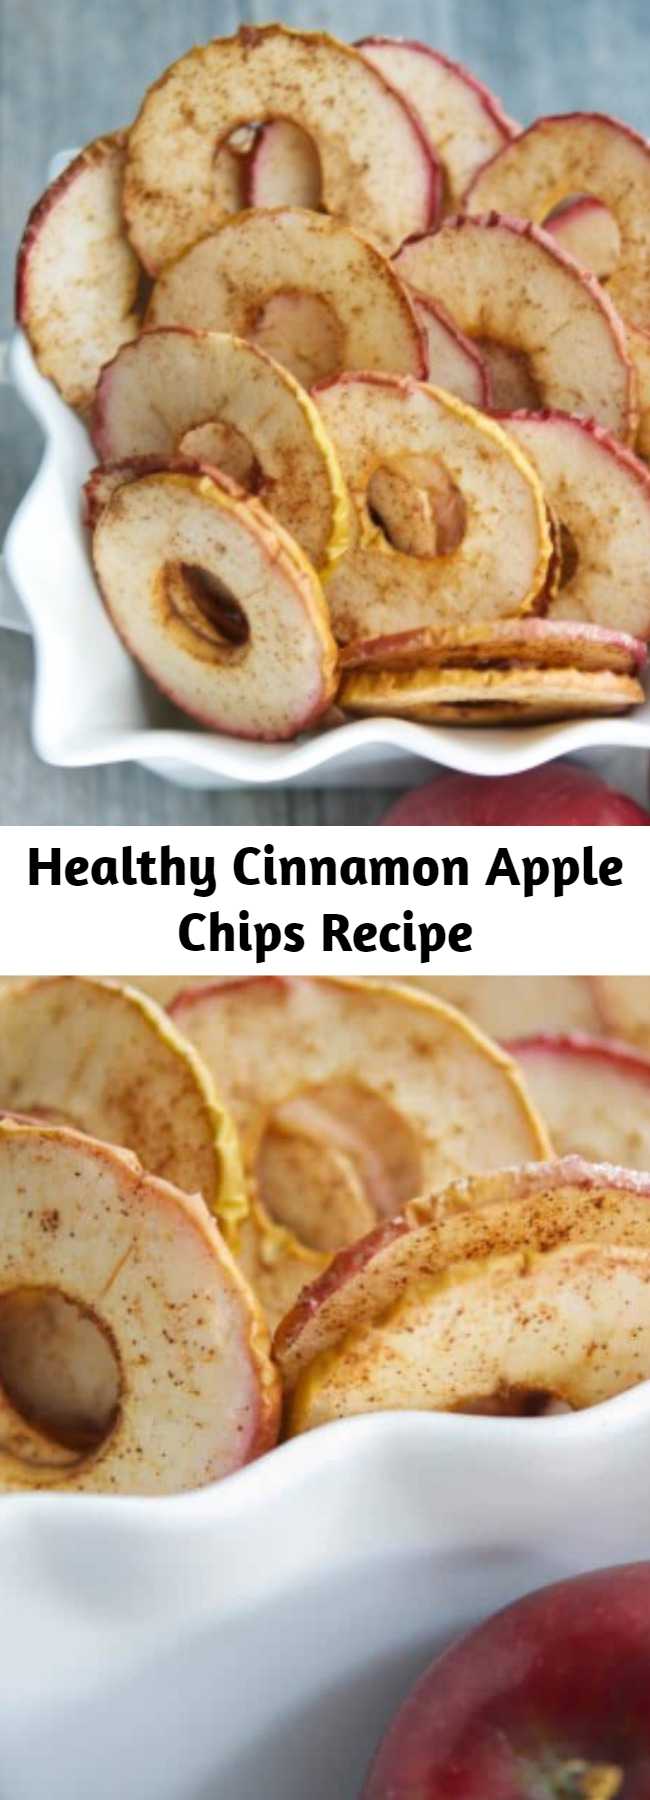 Healthy Cinnamon Apple Chips Recipe - Cinnamon Apple Chips, made with a few simple ingredients like McIntosh apples, cinnamon and sugar are a healthy snack your whole family will love.